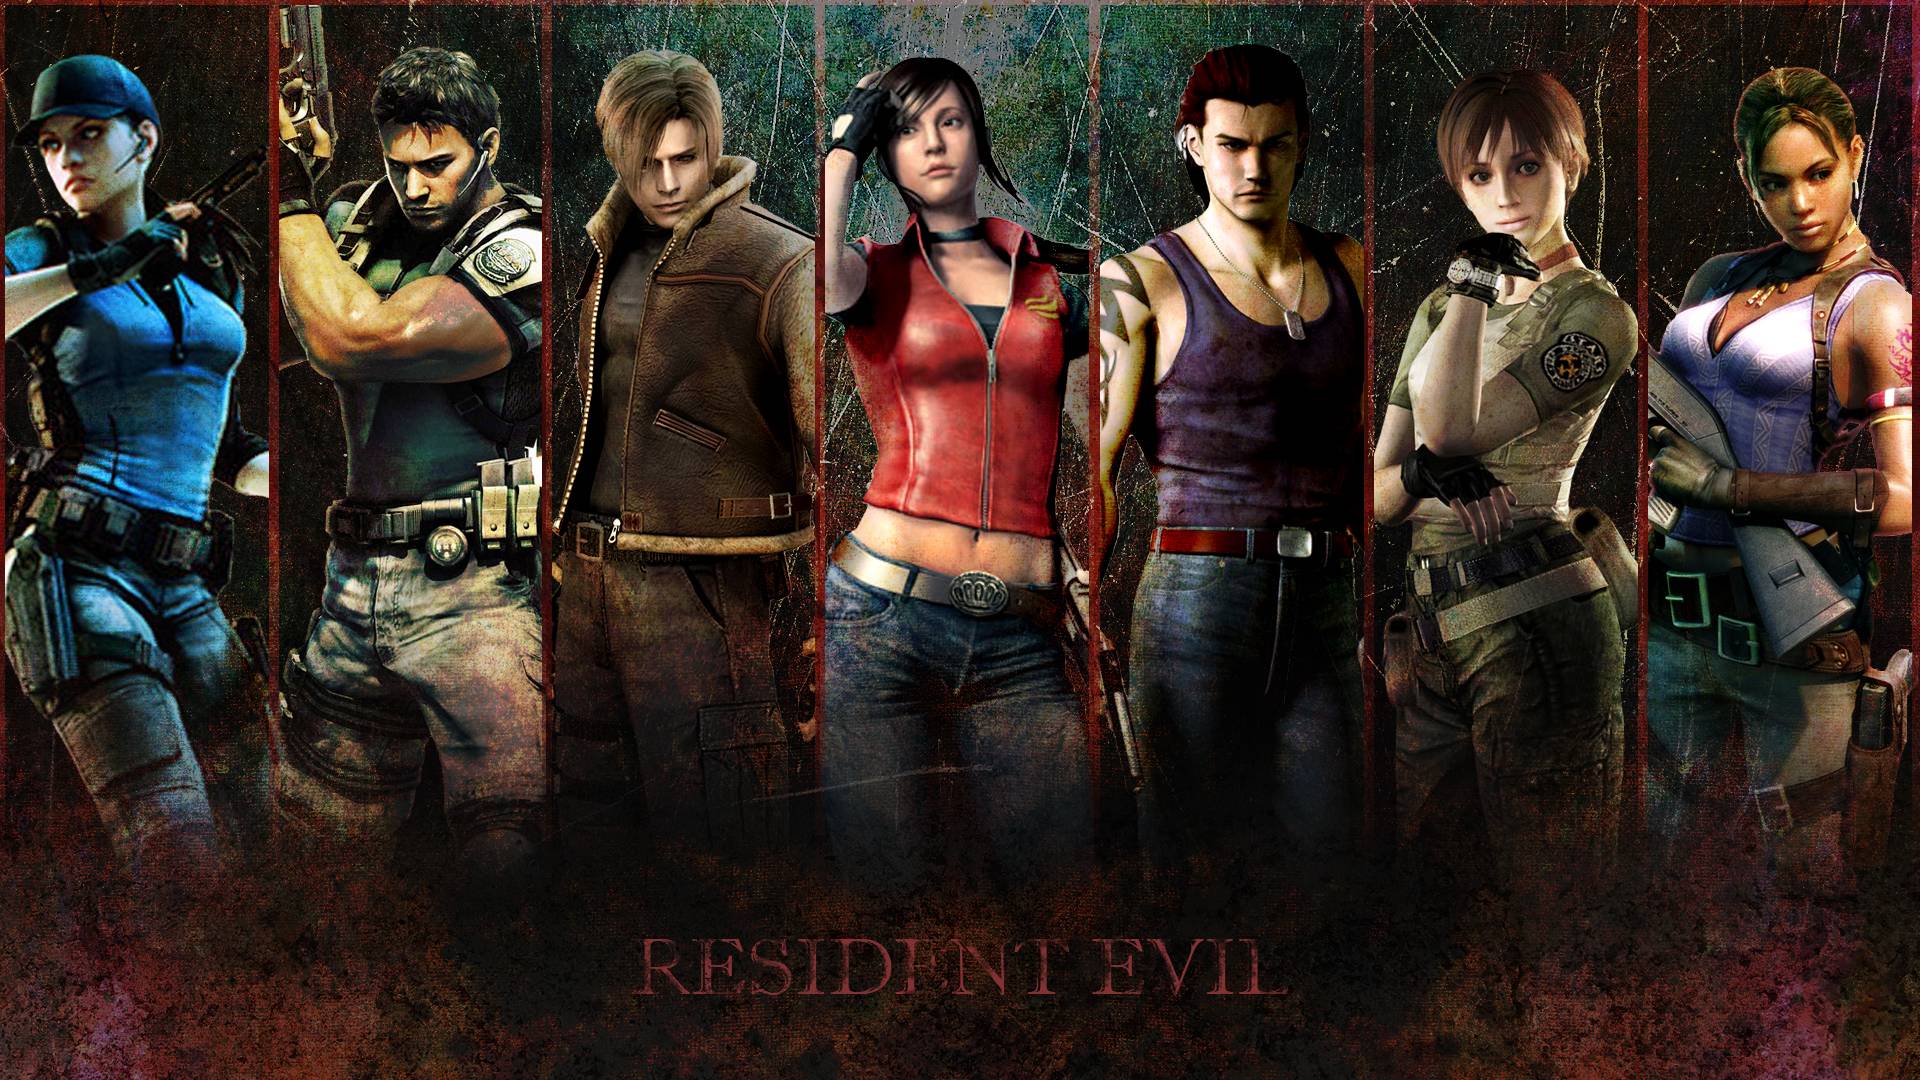 Resident Evil Wallpapers: Excellent Wallpapers to Use